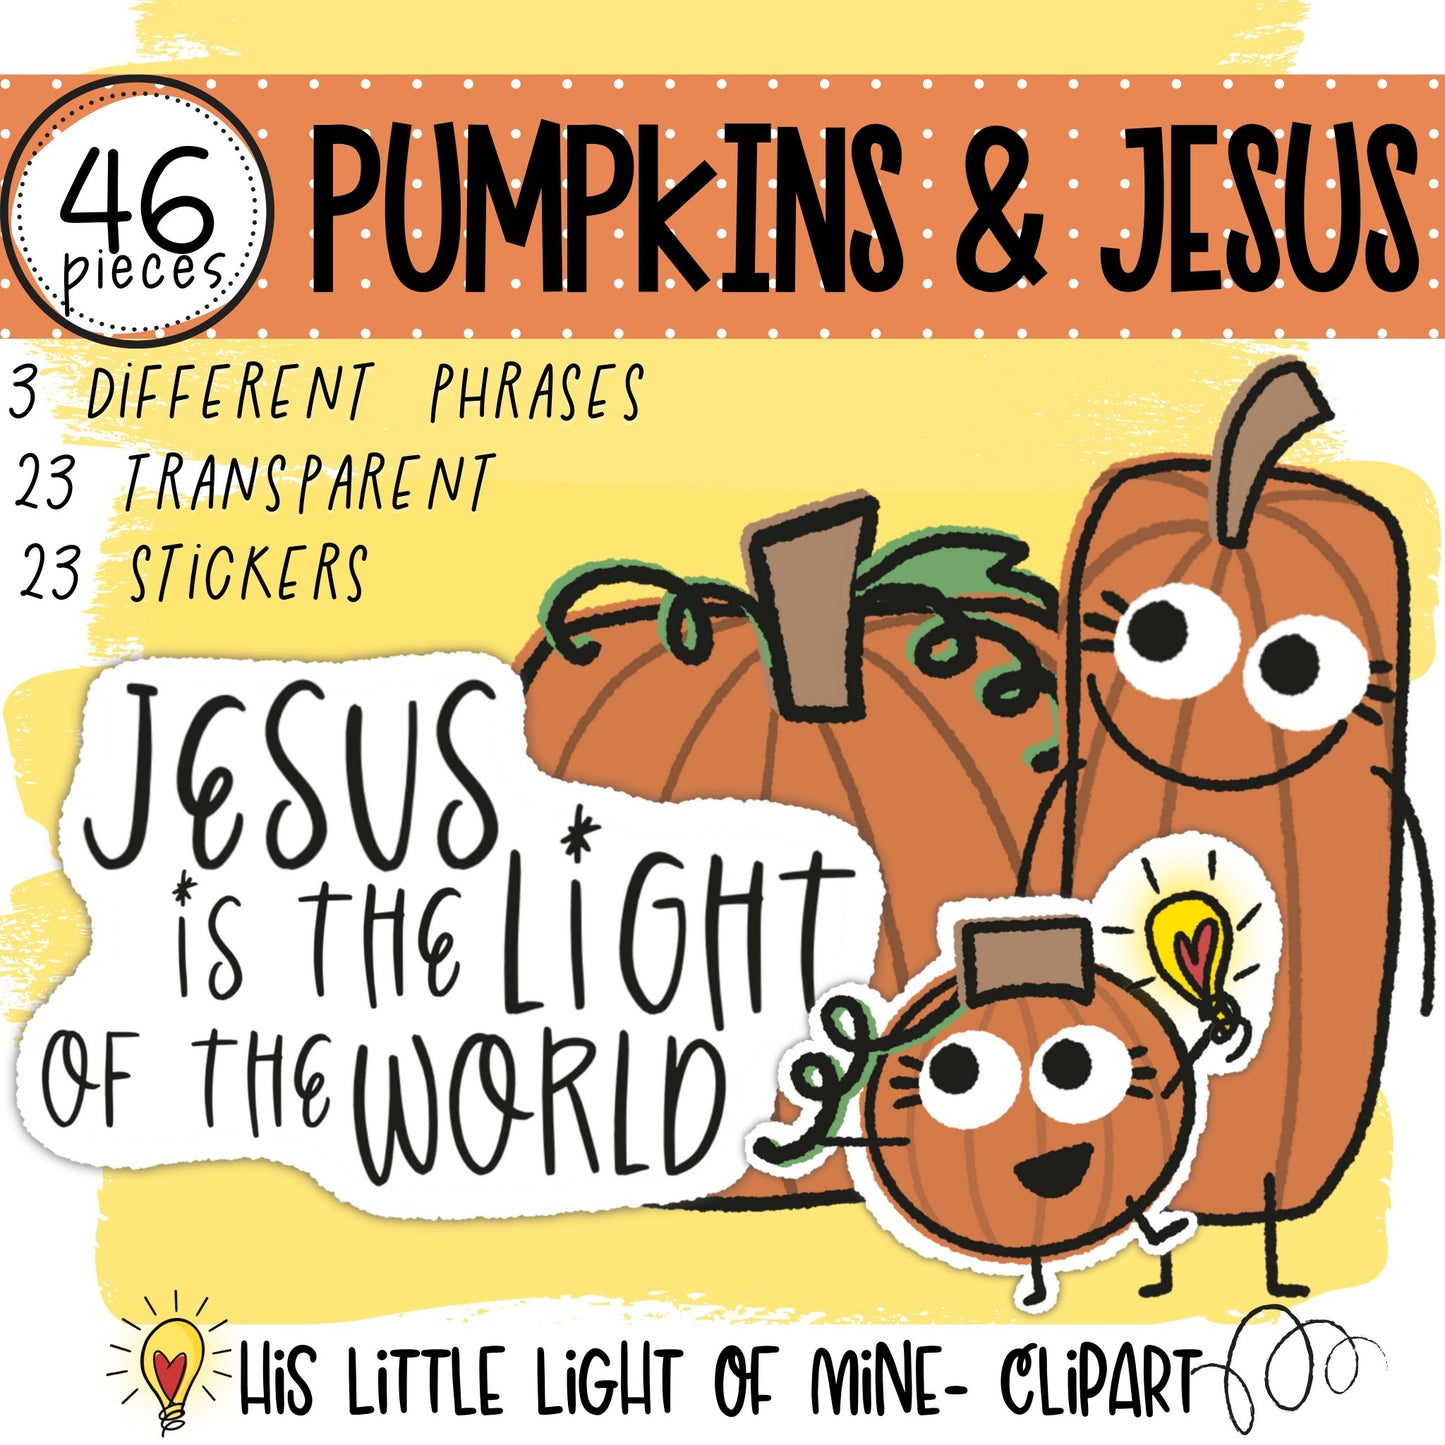 Cover Image of the Pumpkins and Jesus  clip art pack by a self-published illustrator featuring a variety of hand drawn sticker like and transparent pumpkins images and three encouraging phrases 